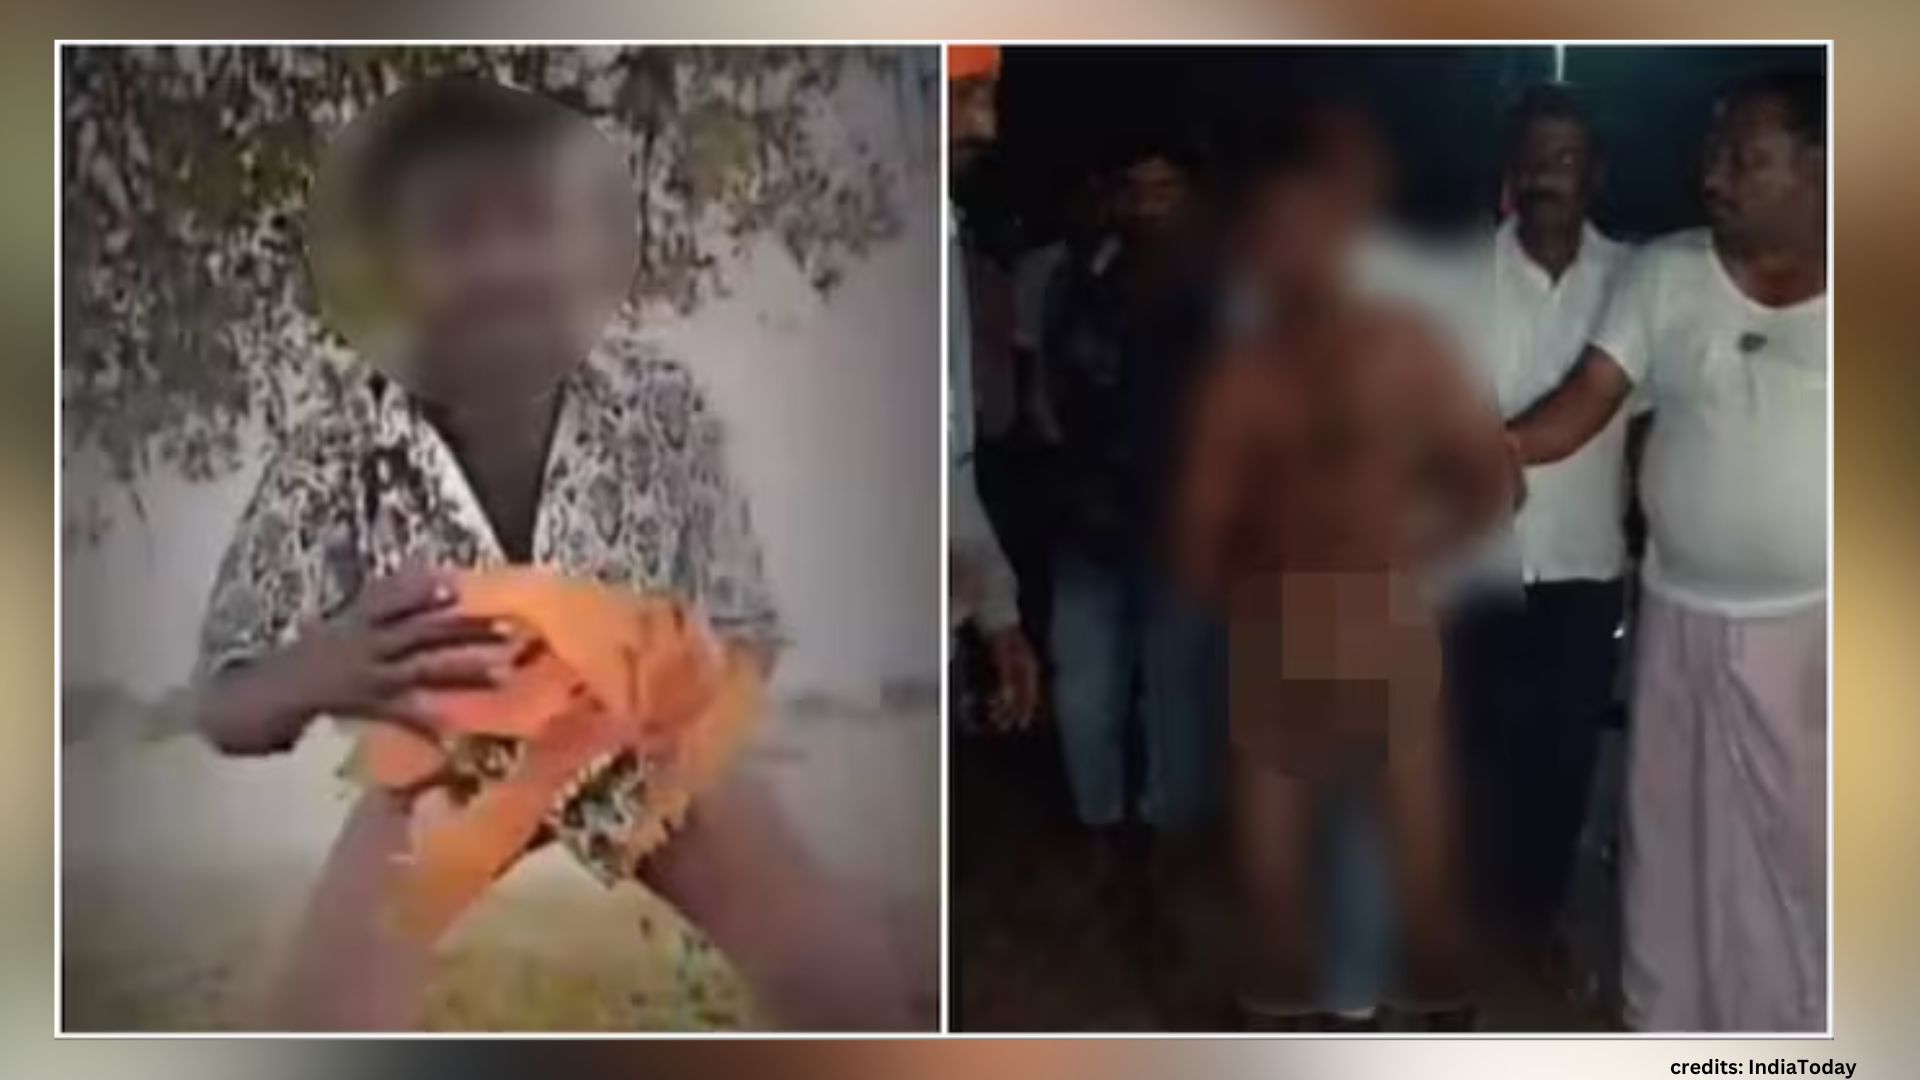 Telangana: Muslim Man Assaulted After Insulting Saffron Flag in Online Video